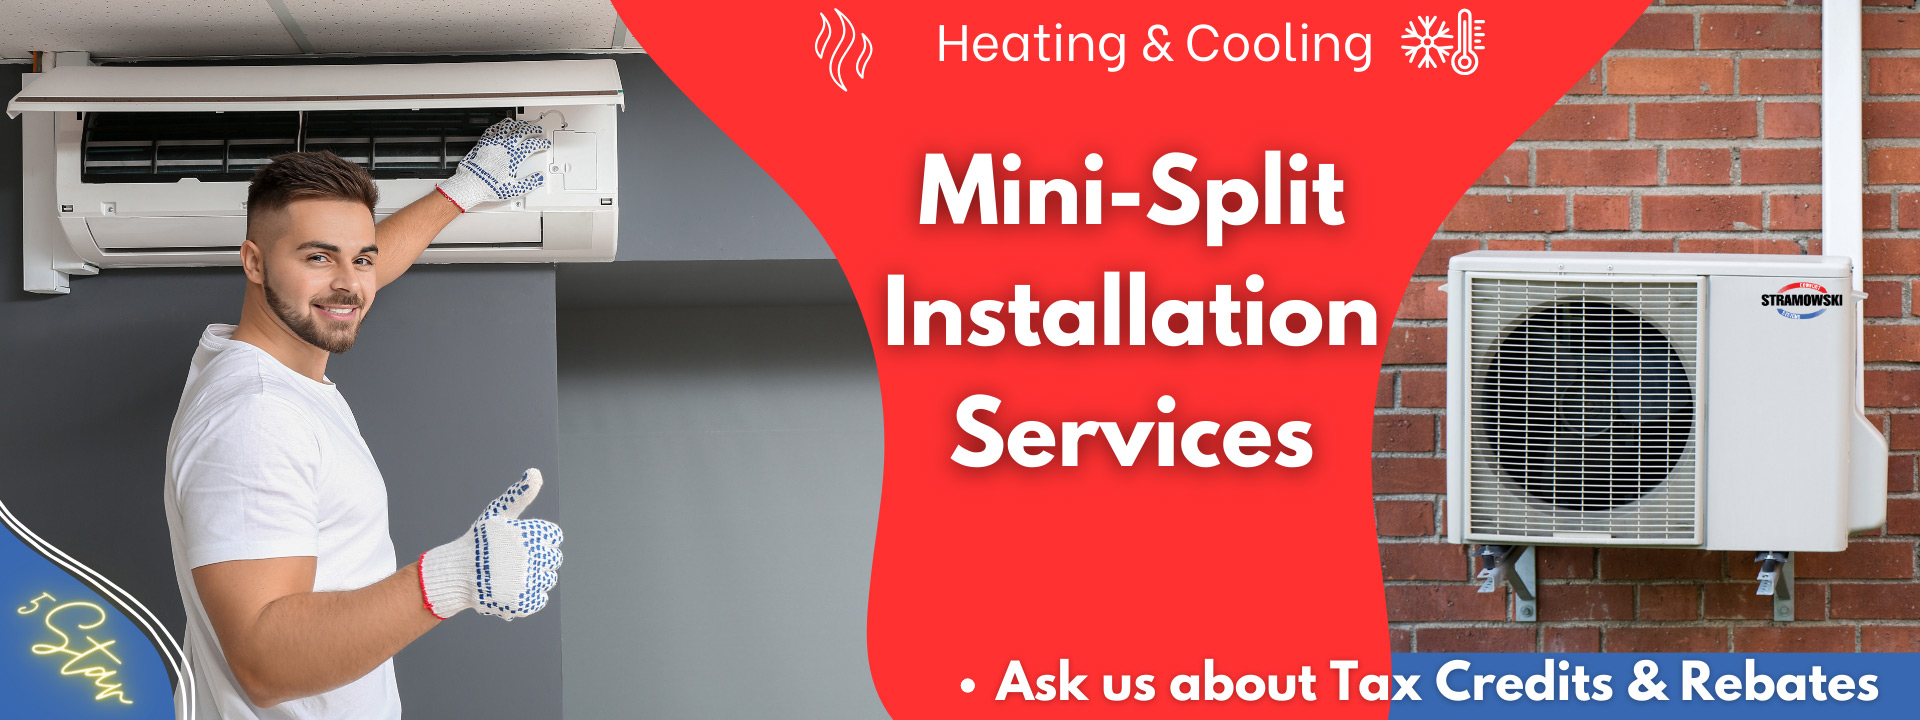 Ductless Mini-Split Replacement Installers